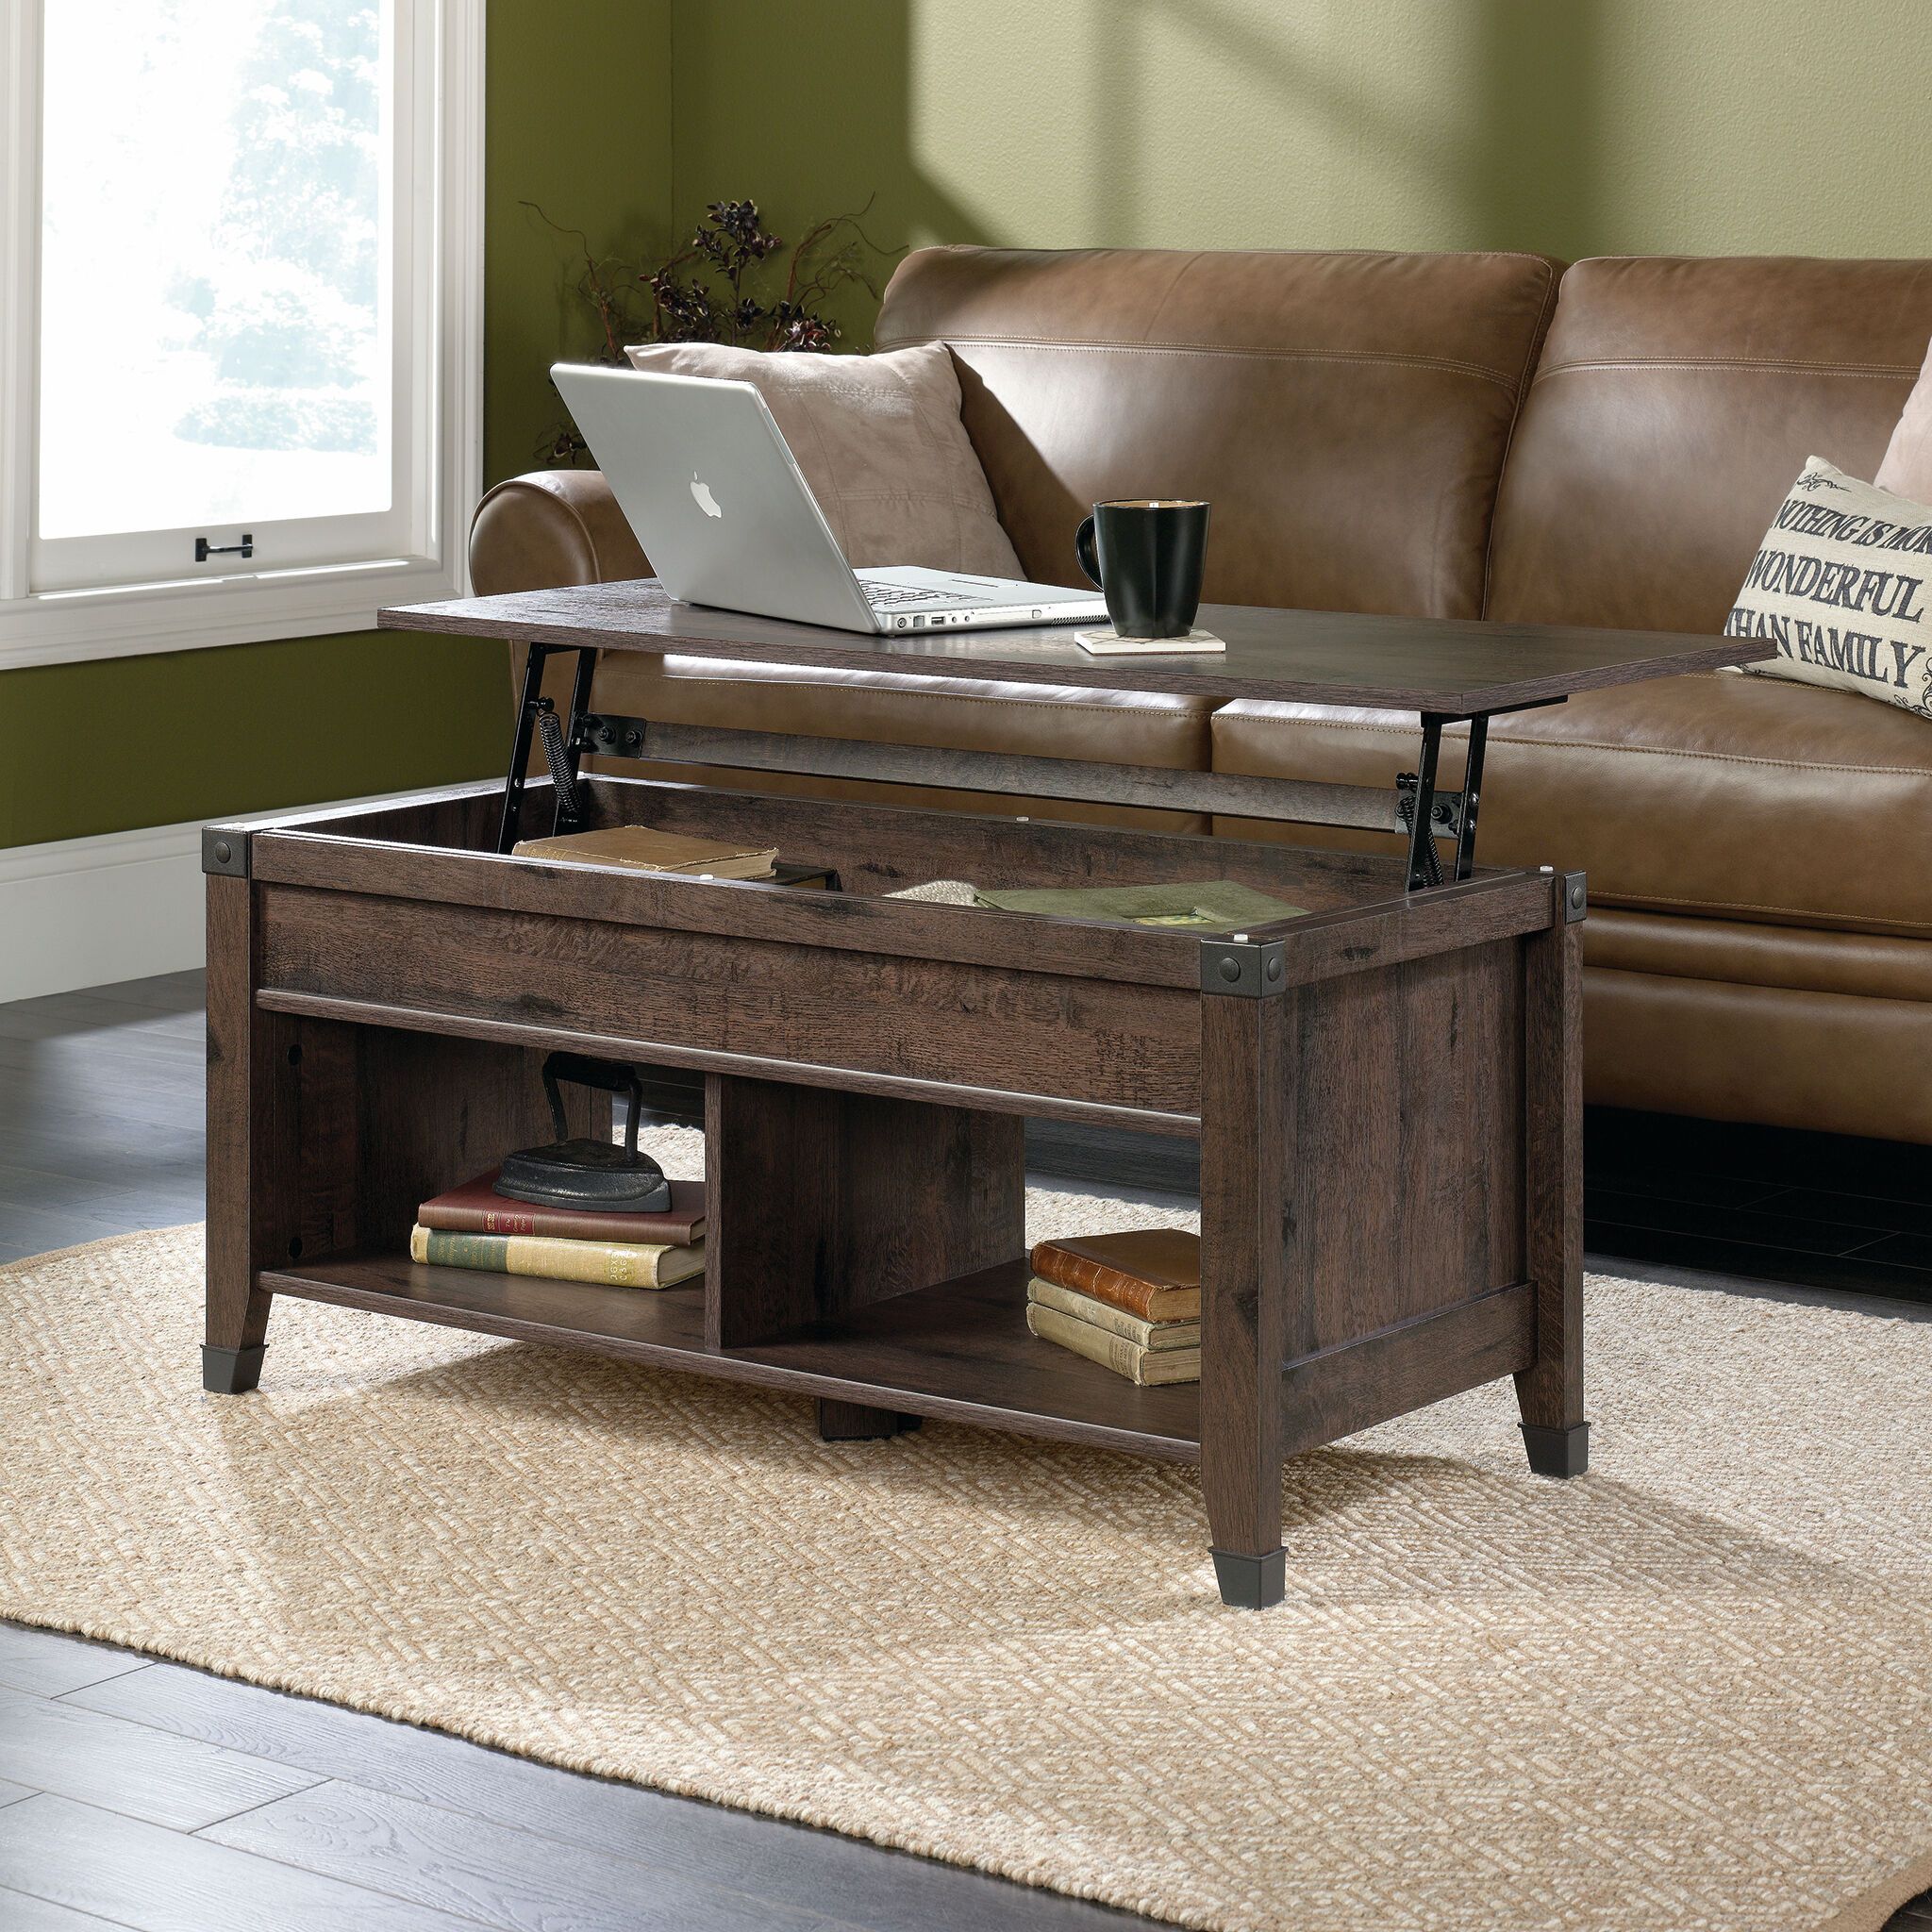 Rectangular Lift Top Contemporary Coffee Table In Coffee Oak | Mathis Throughout Wood Lift Top Coffee Tables (View 3 of 20)